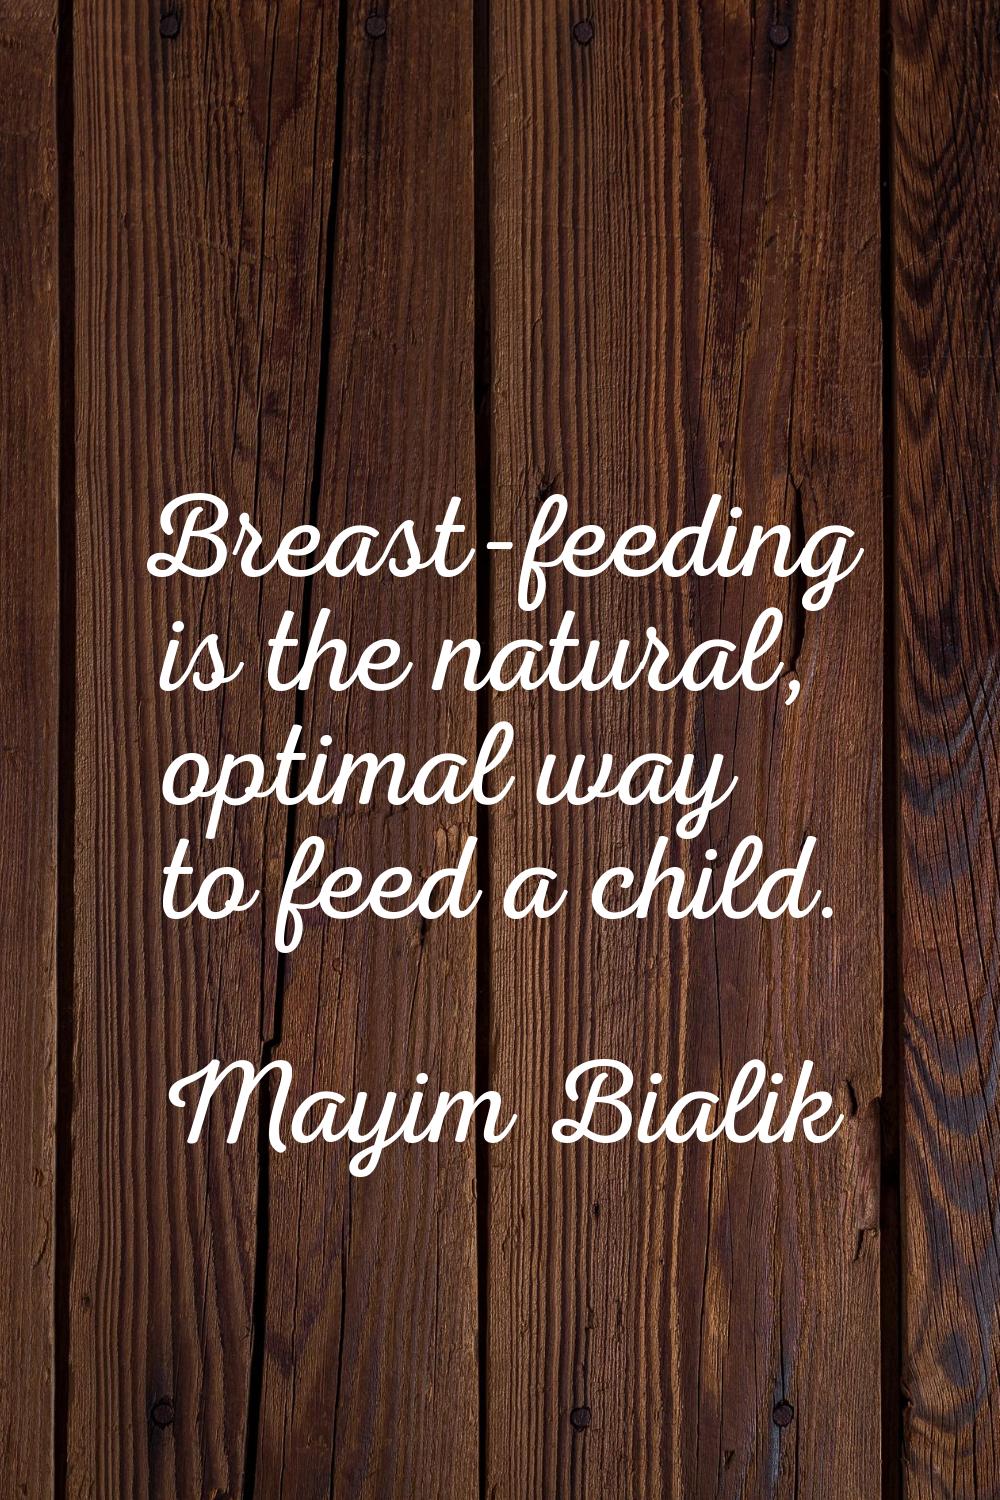 Breast-feeding is the natural, optimal way to feed a child.